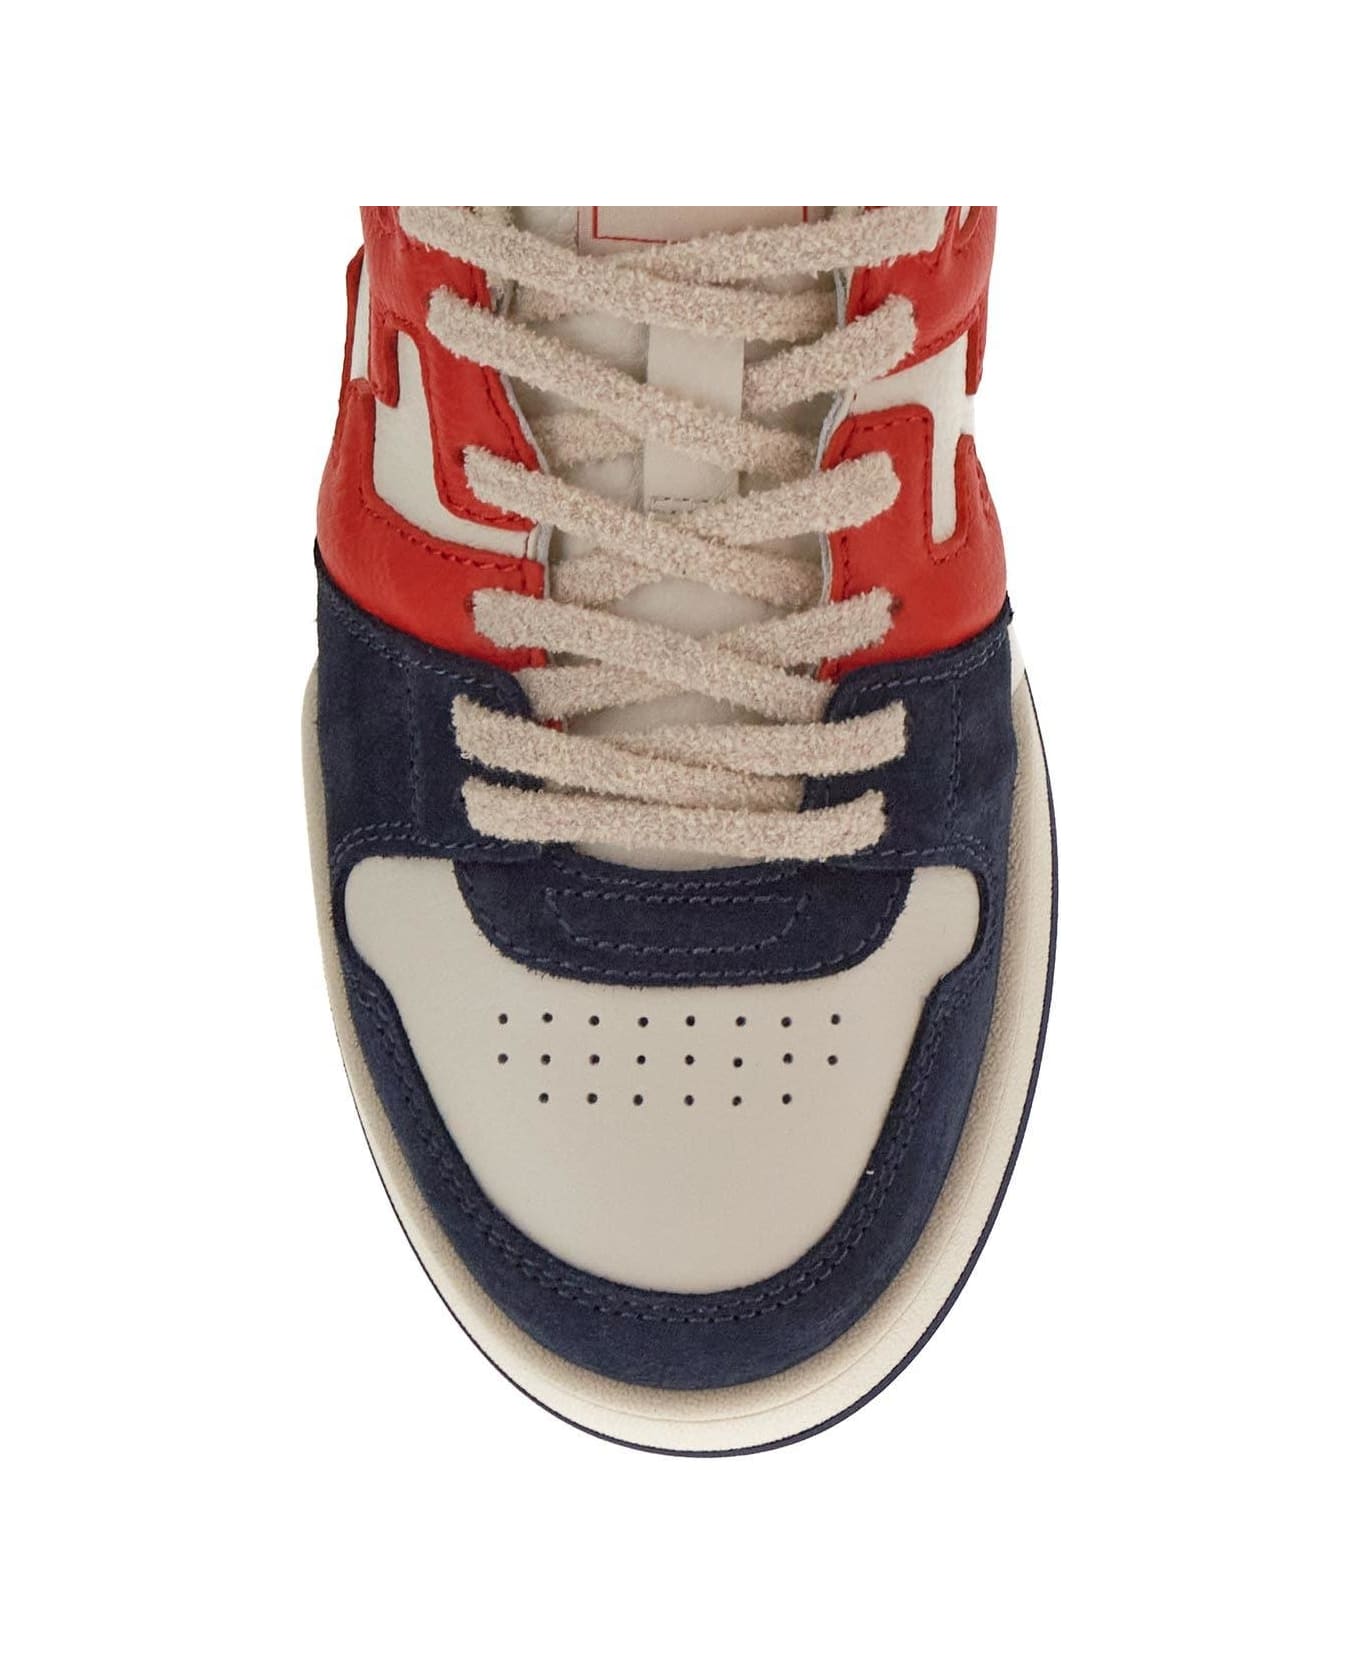 Fendi Low Top Red And Blue Suede Sneaker